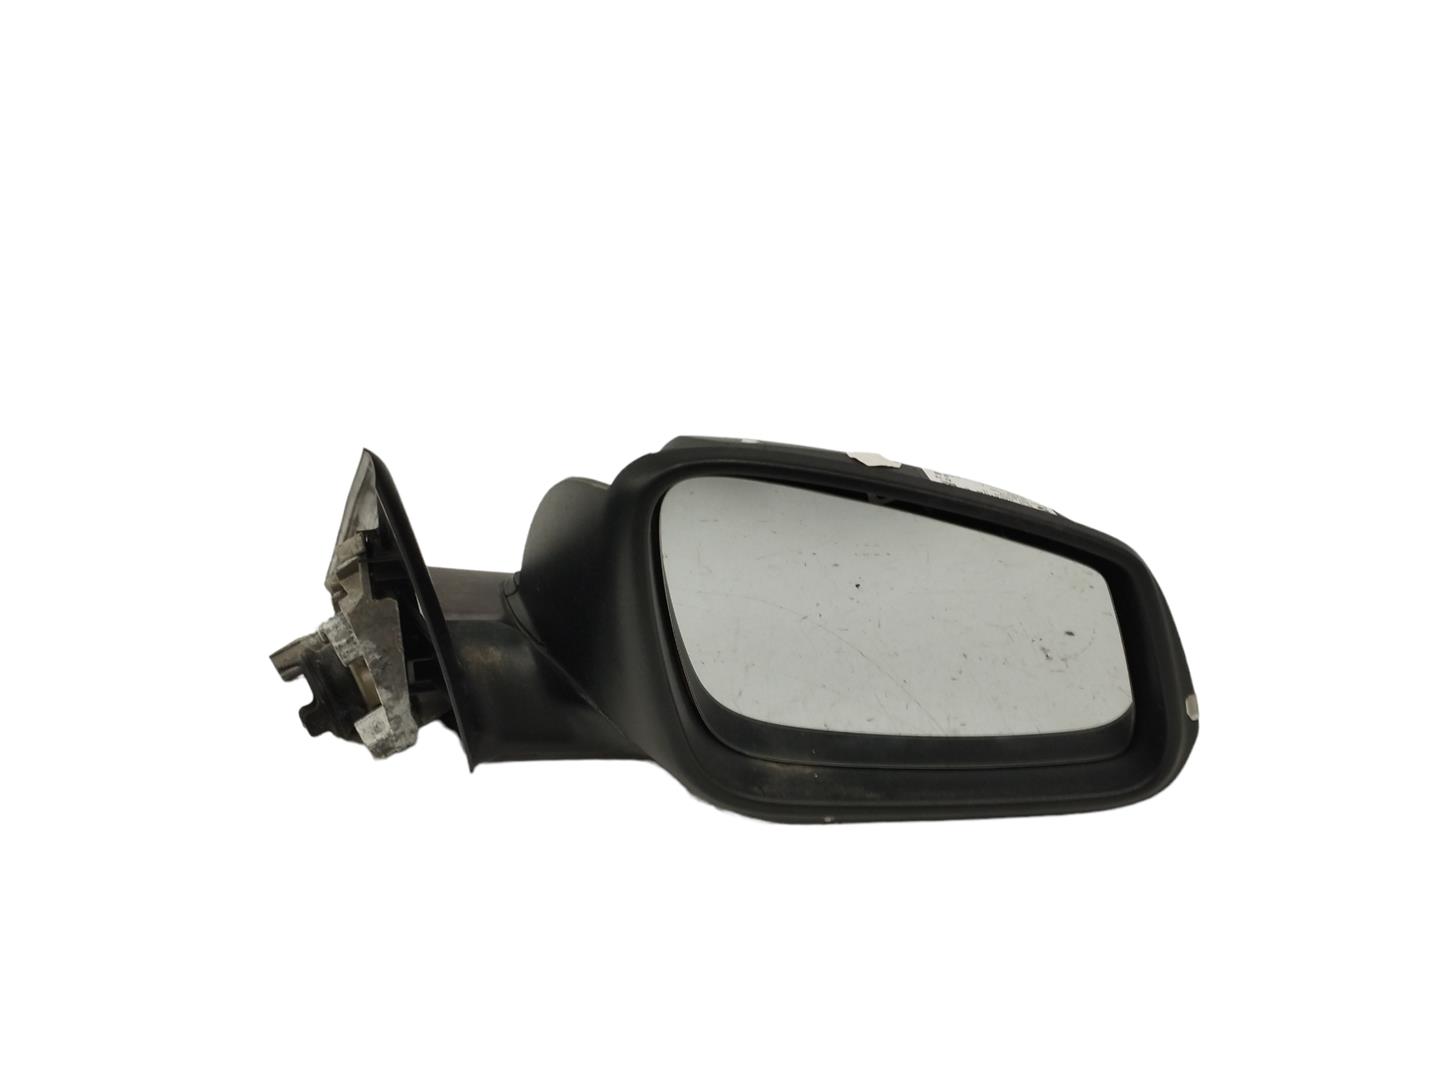 BMW 3 Series F30/F31 (2011-2020) Right Side Wing Mirror 51167245080, 6CABLES, SINTAPA 24054761